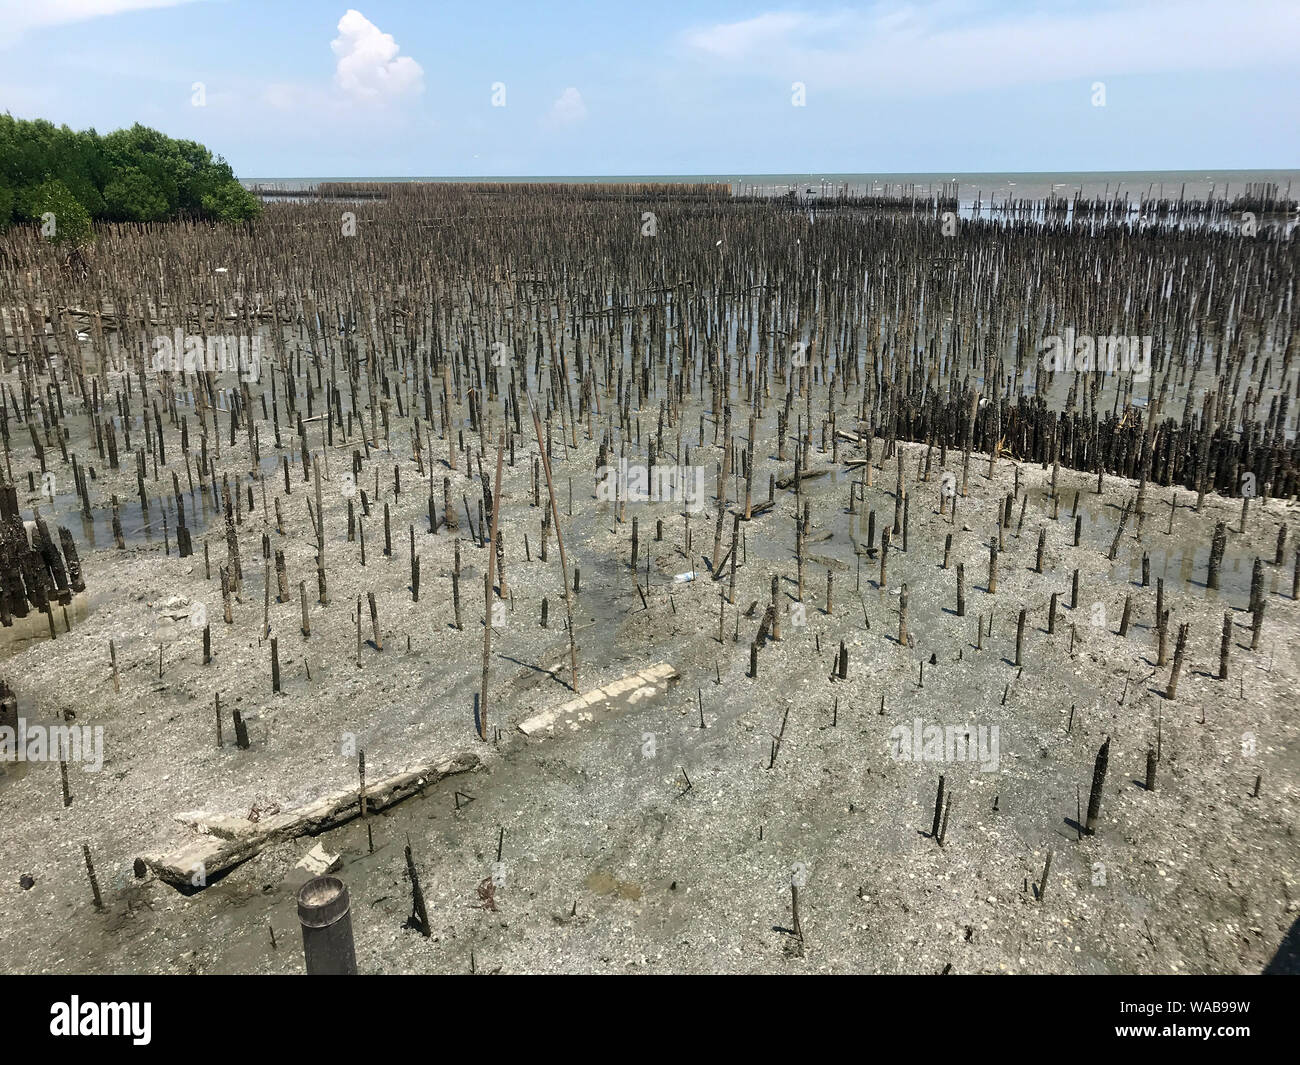 A land erosion protection - The rows of bamboo sticks on seashore for wave breaking about barriers, Samut Sakhon, Thailand. Stock Photo